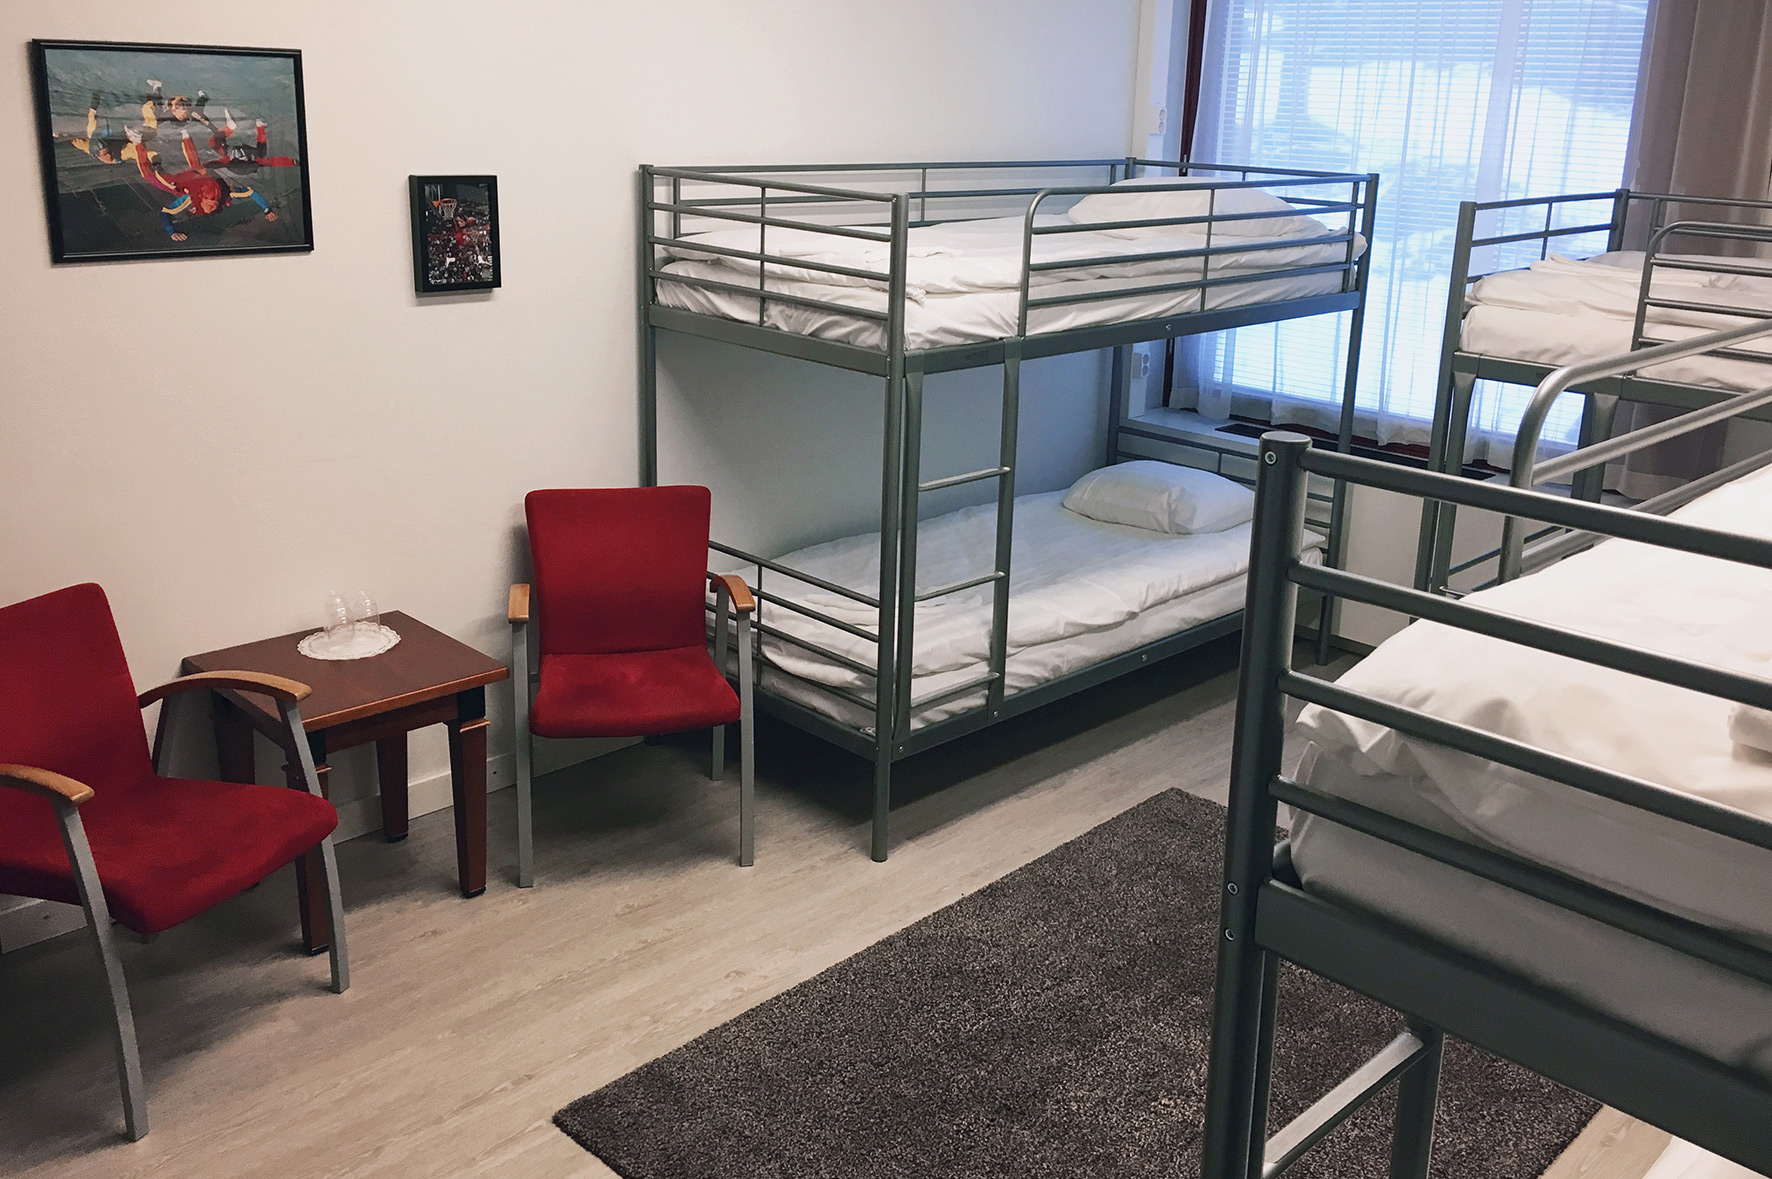 Hotel Korpilampi Espoo Dorm room for sports and youth groups